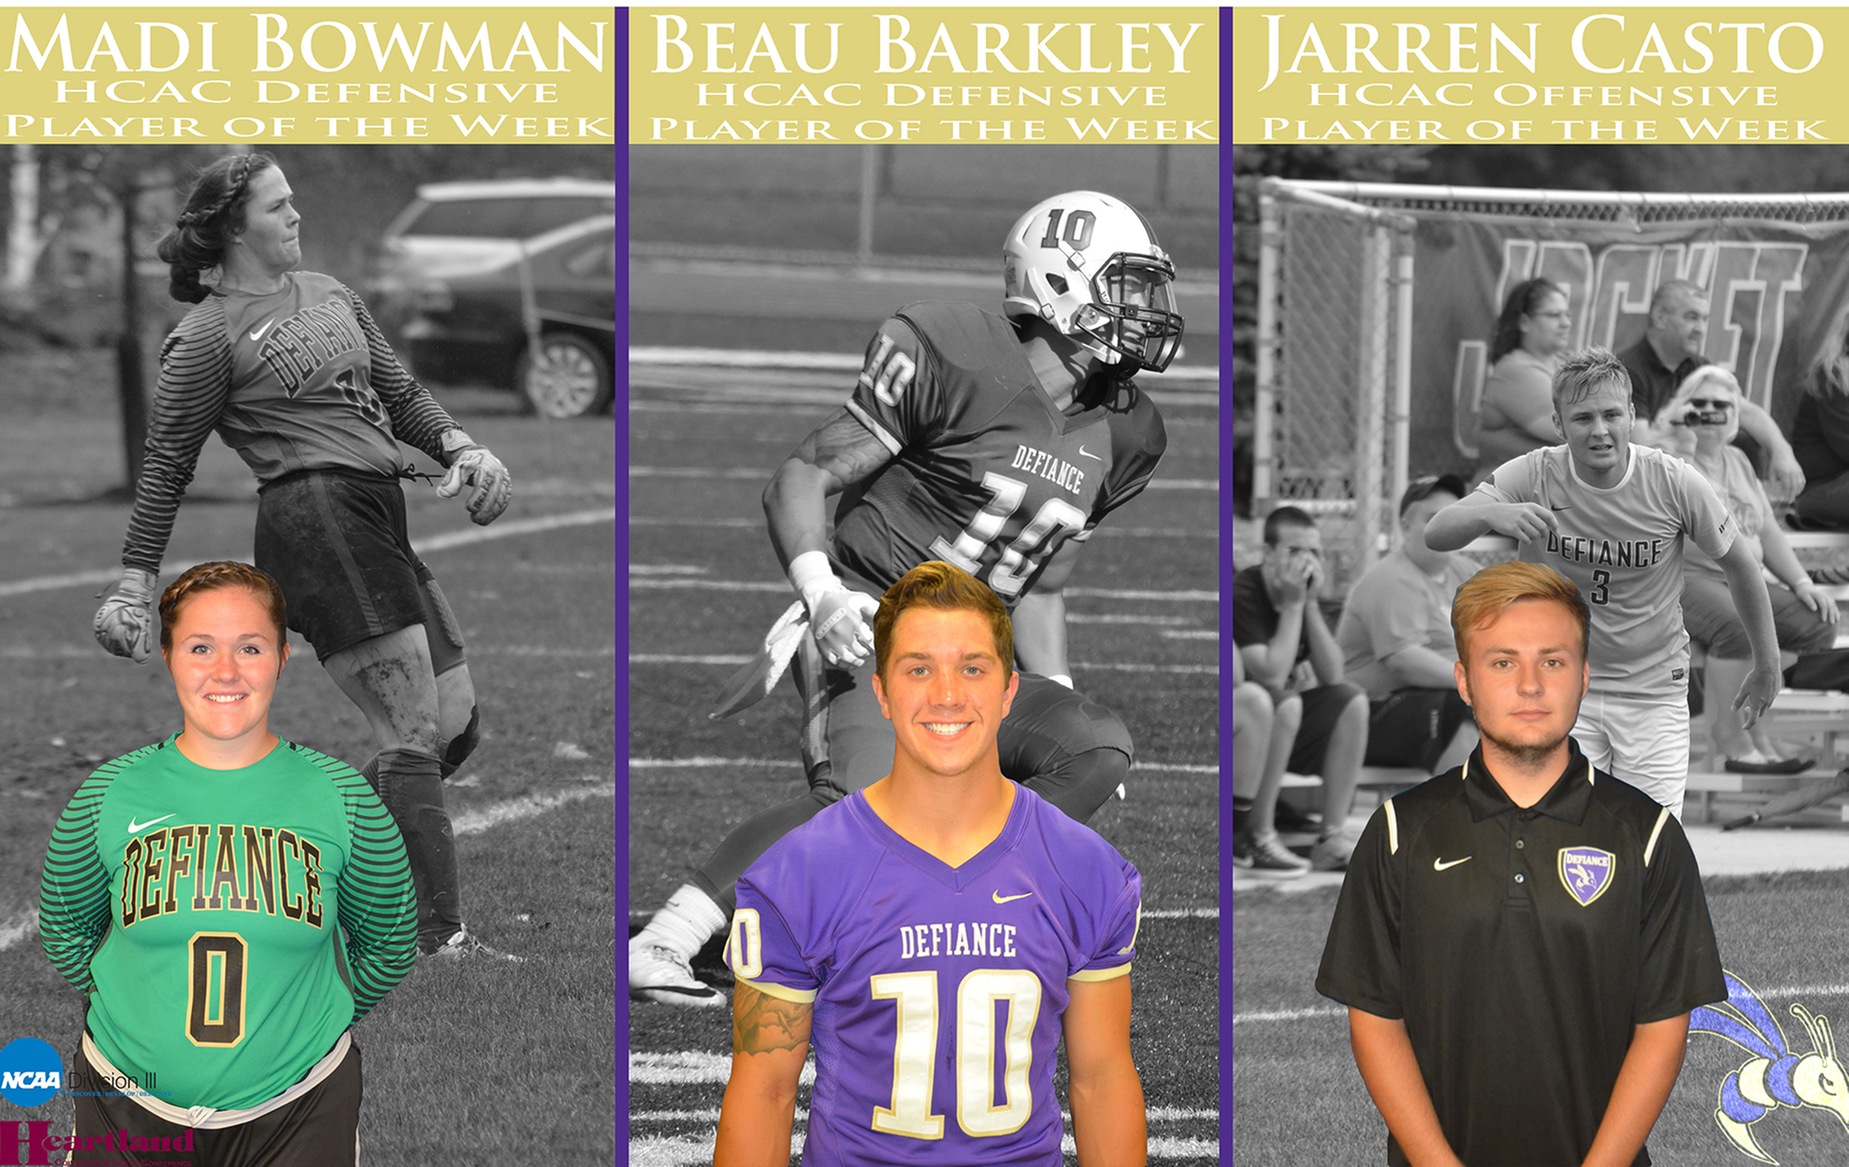 Three Yellow Jackets Earn HCAC Player of the Week Honors